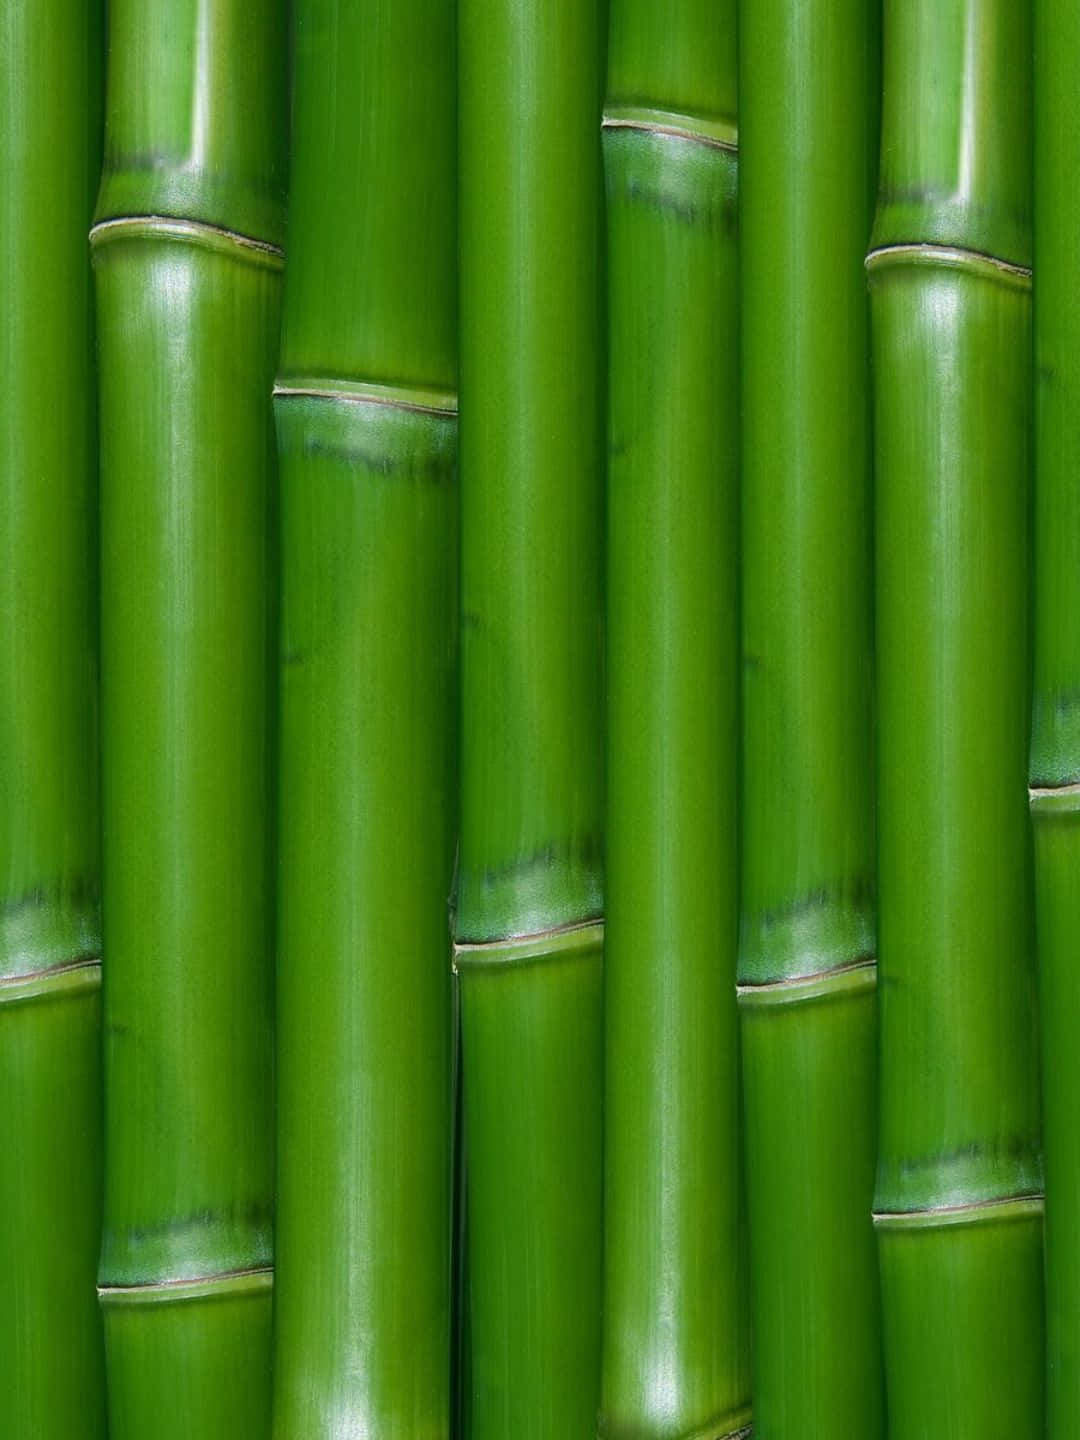 Majestic Tropical Bamboo Grove in 1440p